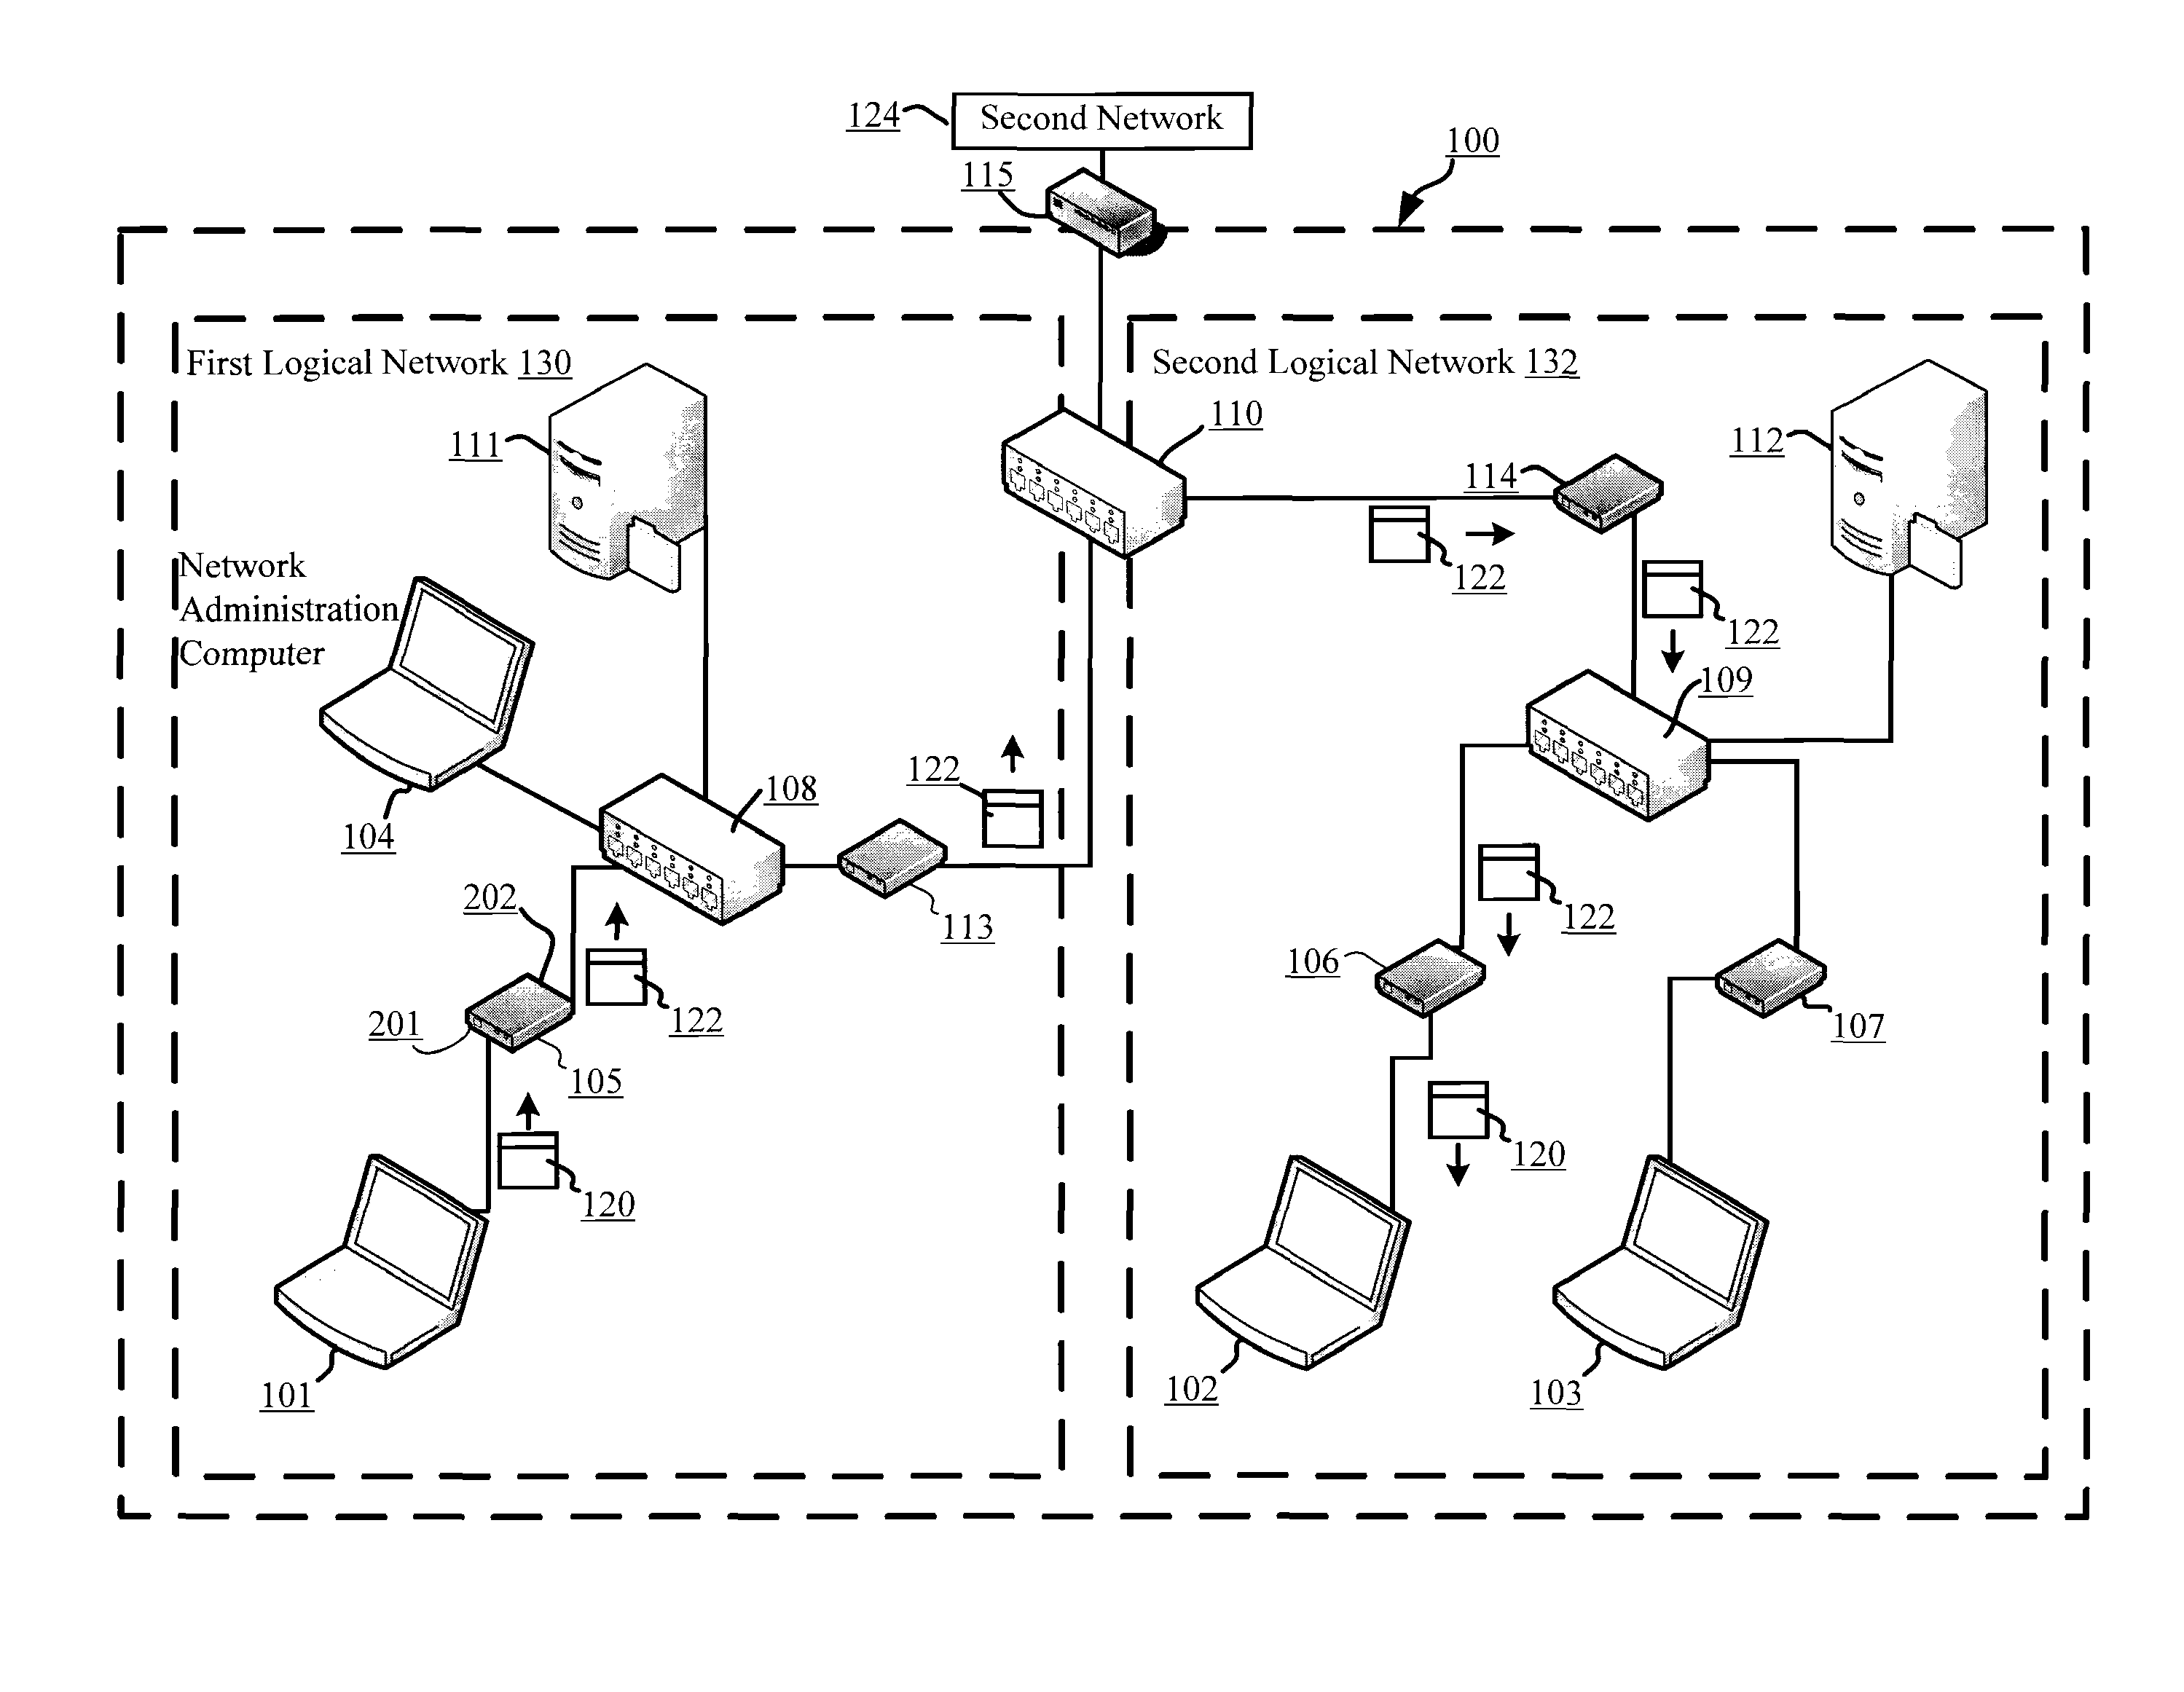 Systems and methods for identifying, deterring and/or delaying attacks to a network using shadow networking techniques